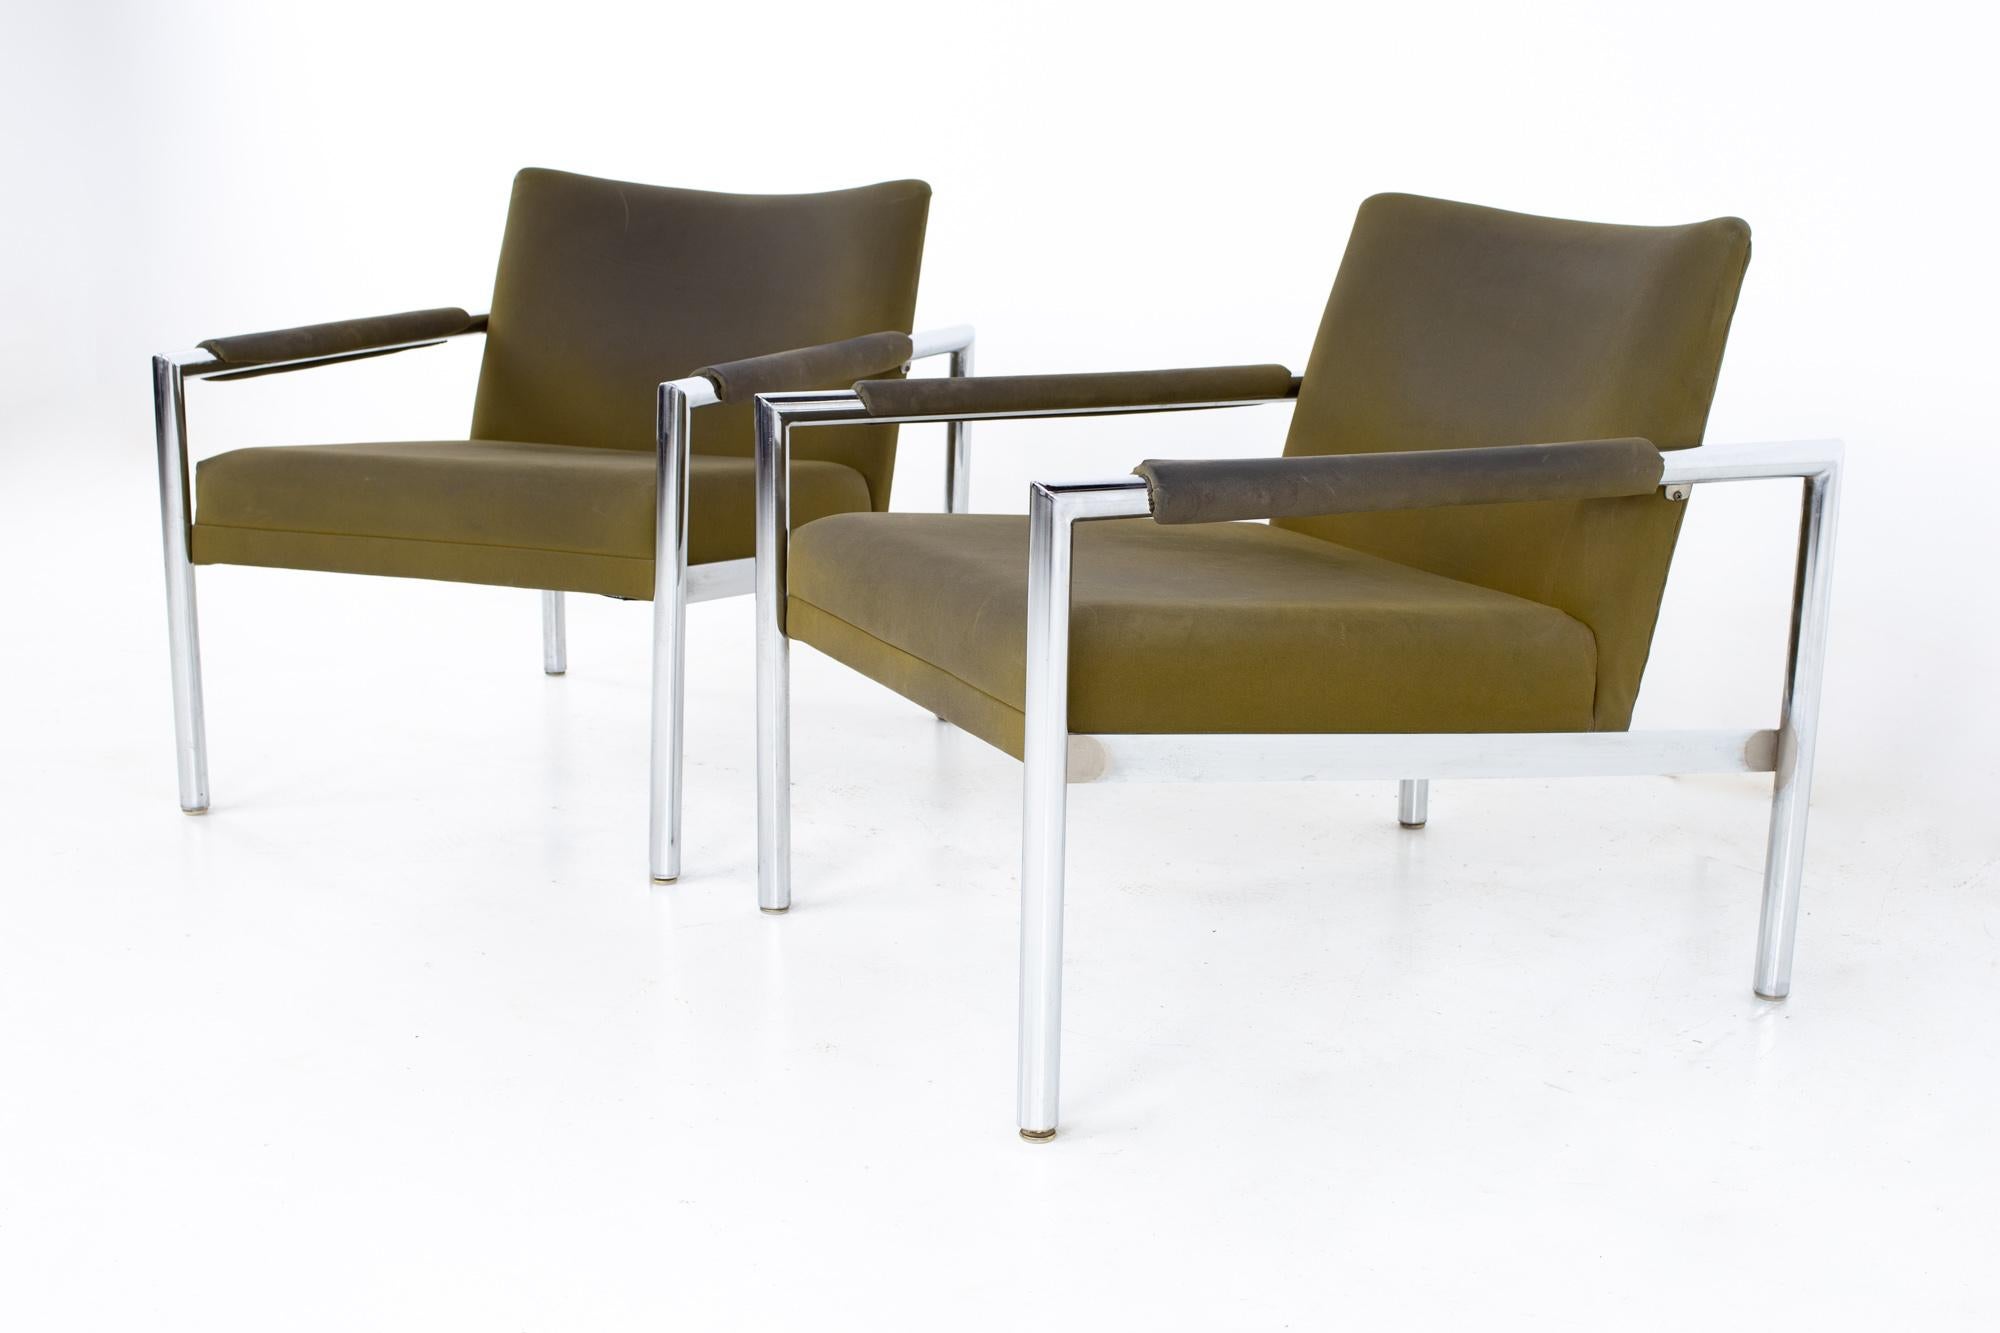 Jack Cartwright for Founders style mid century chrome lounge chairs - A pair
Each chair measures: 25 wide x 29 deep x 26 high, with a seat height of 16 inches and an arm height of 20.5 inches 

All pieces of furniture can be had in what we call